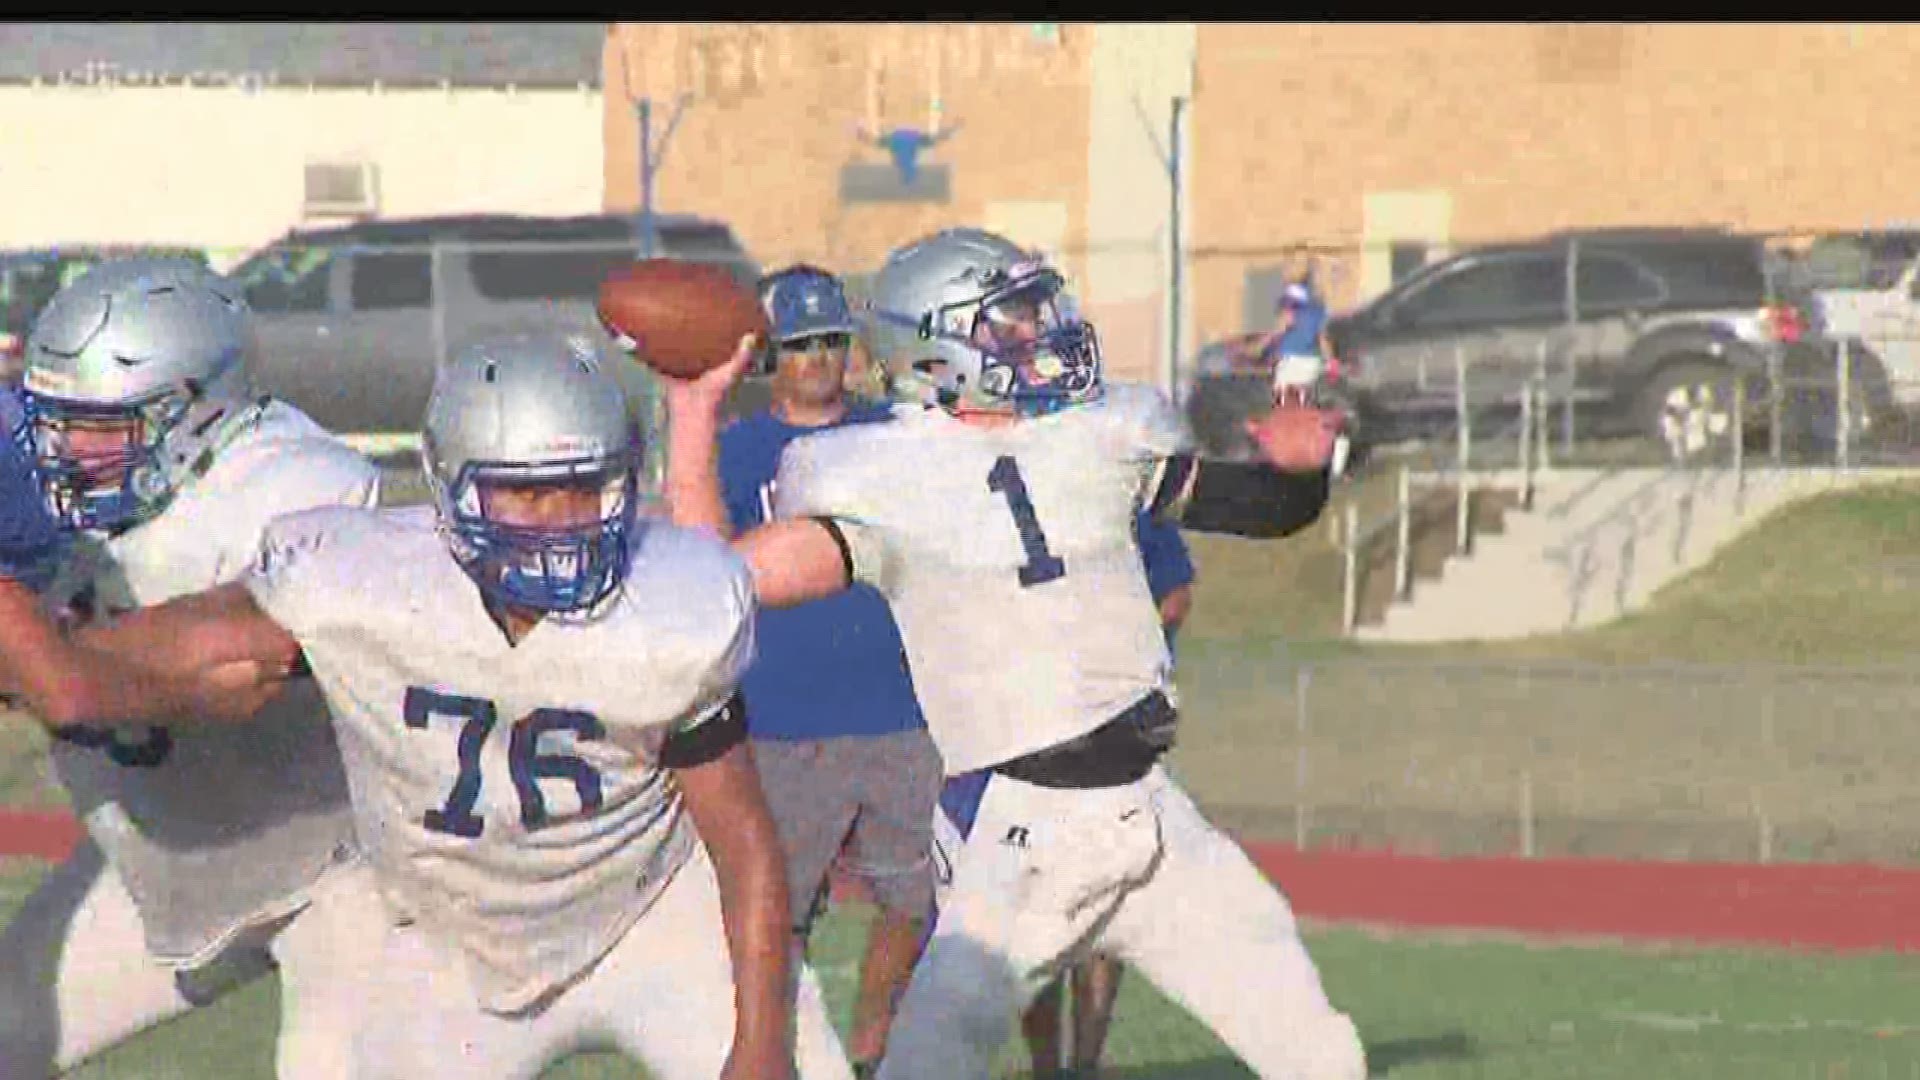 The Ingleside Mustangs head into the 2018 season healthy and with multiple returning starters, giving the team confidence they can make a push into the playoffs.